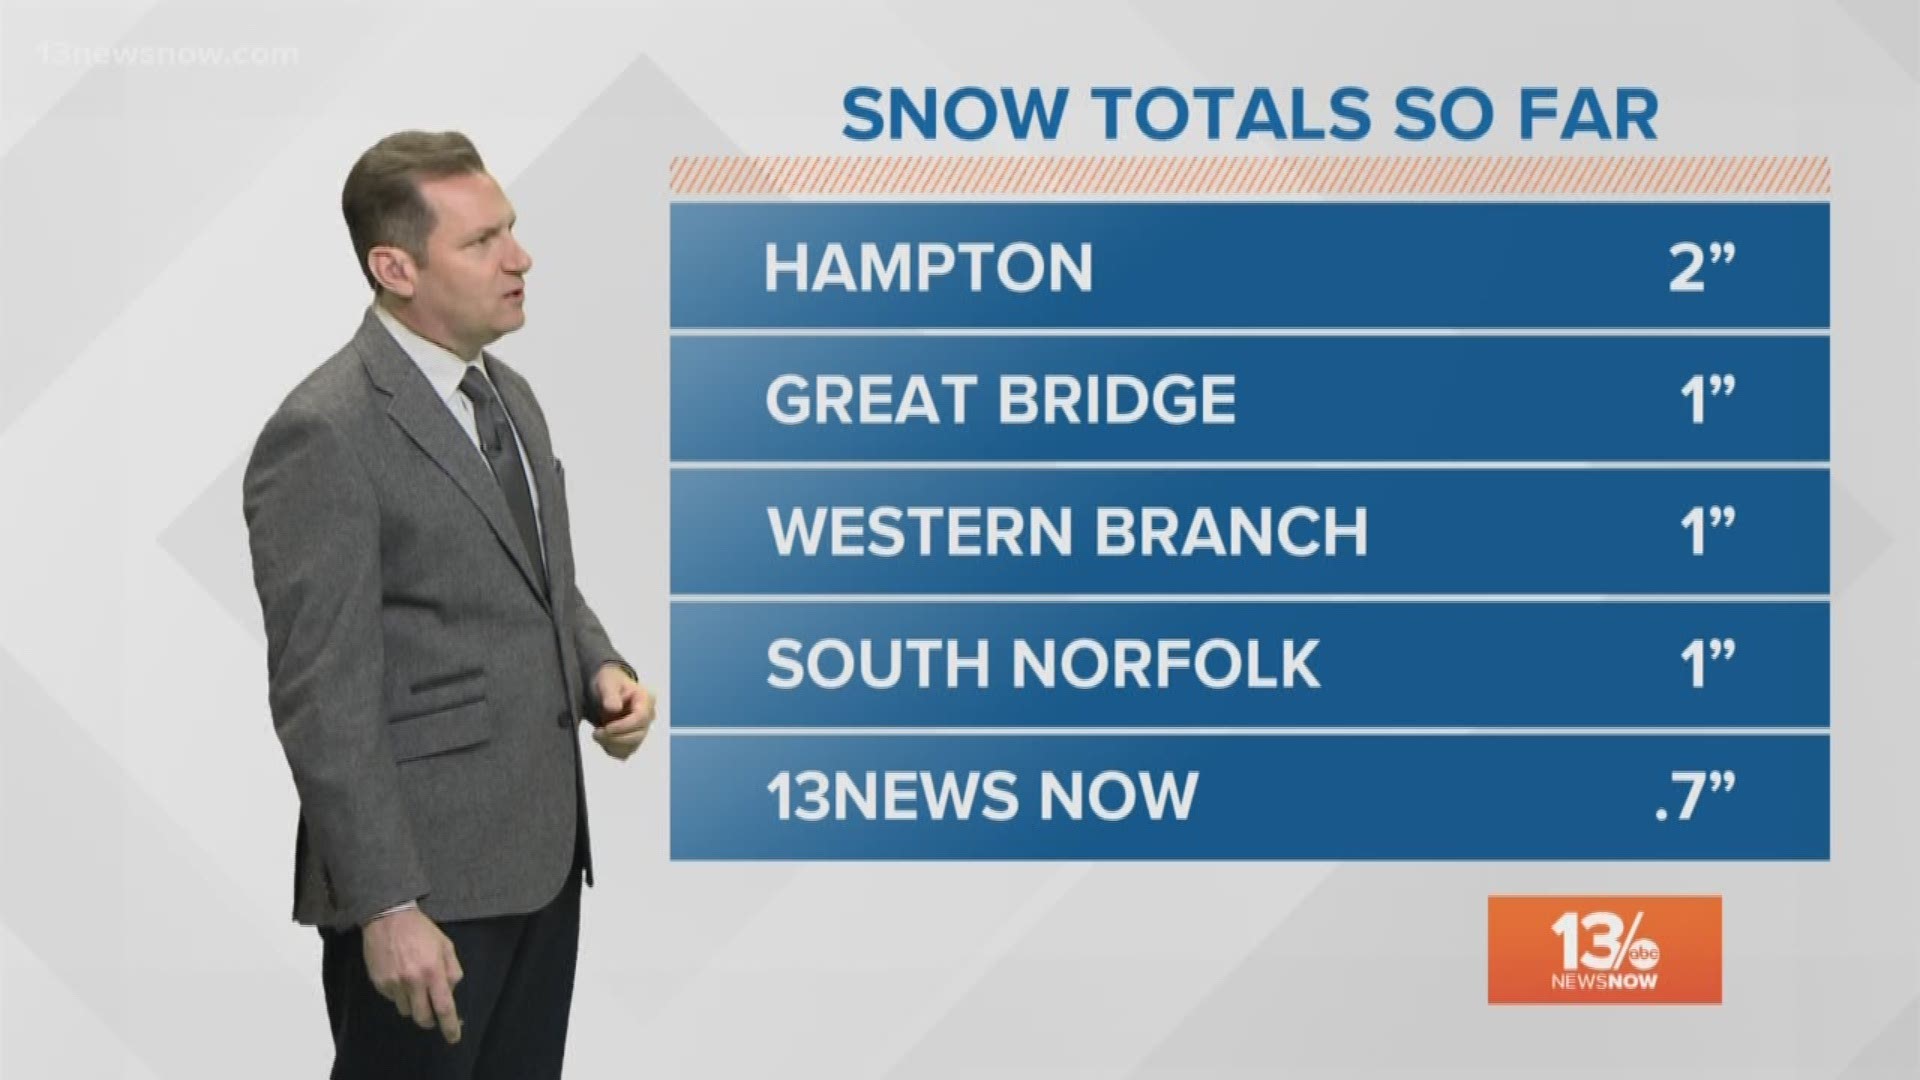 We've had 10 hours of snow falling at the airport in Norfolk. Some areas got at least 2 inches of snow.